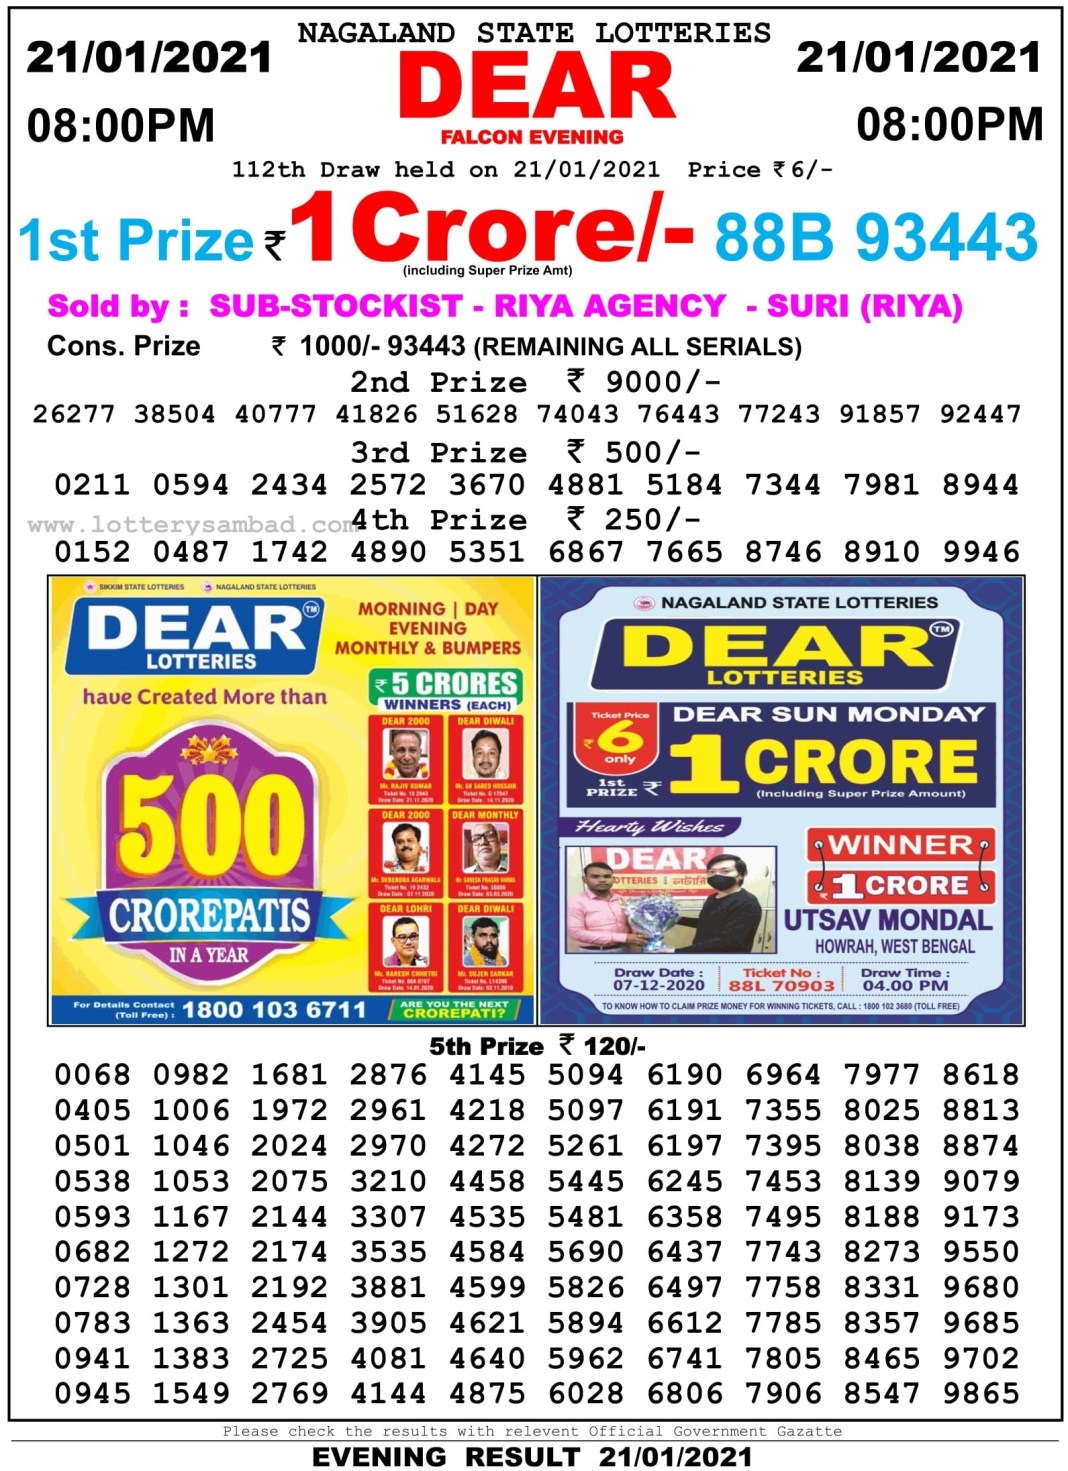 DEAR DAILY 8PM LOTTERY RESULT 21.1.2021